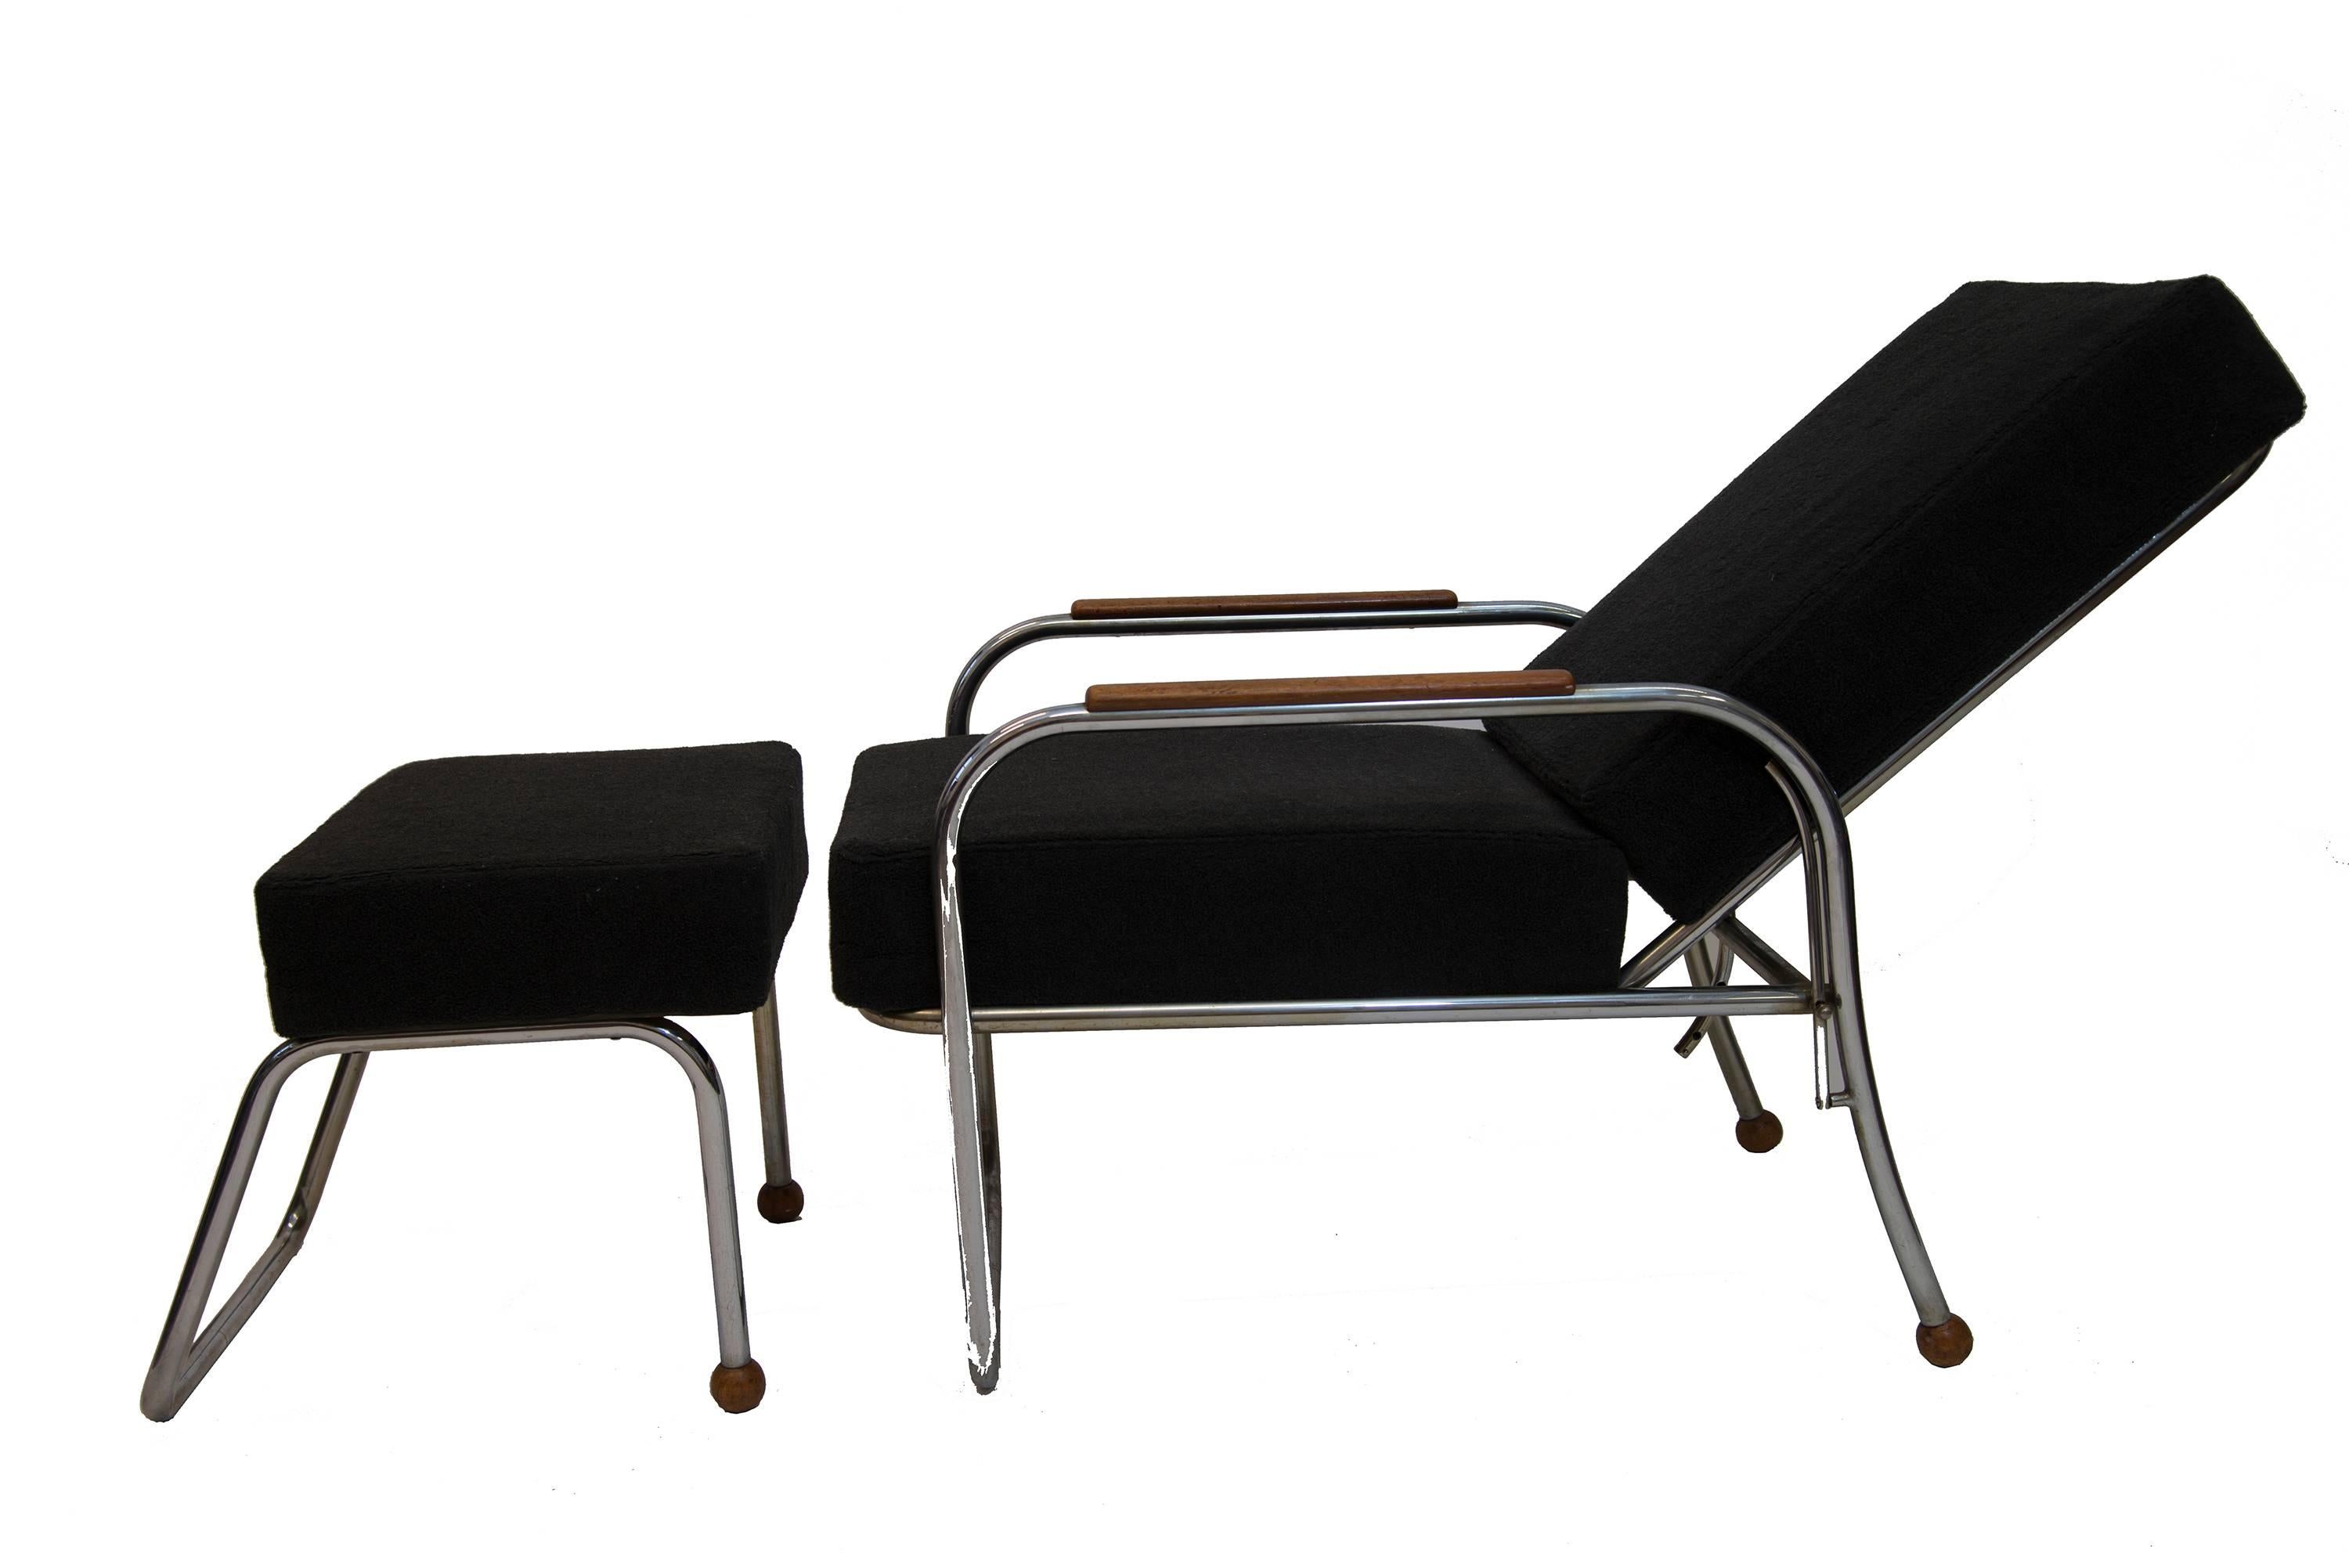 Nice design funkies armchair with footstool in Bauhaus style. With metal legs and teak armlayers. Also teak on back legs of both chair and footstool formed as small balls. Nice black/grey cottonlike soft fabric. From circa 1930s. Adjustable back in